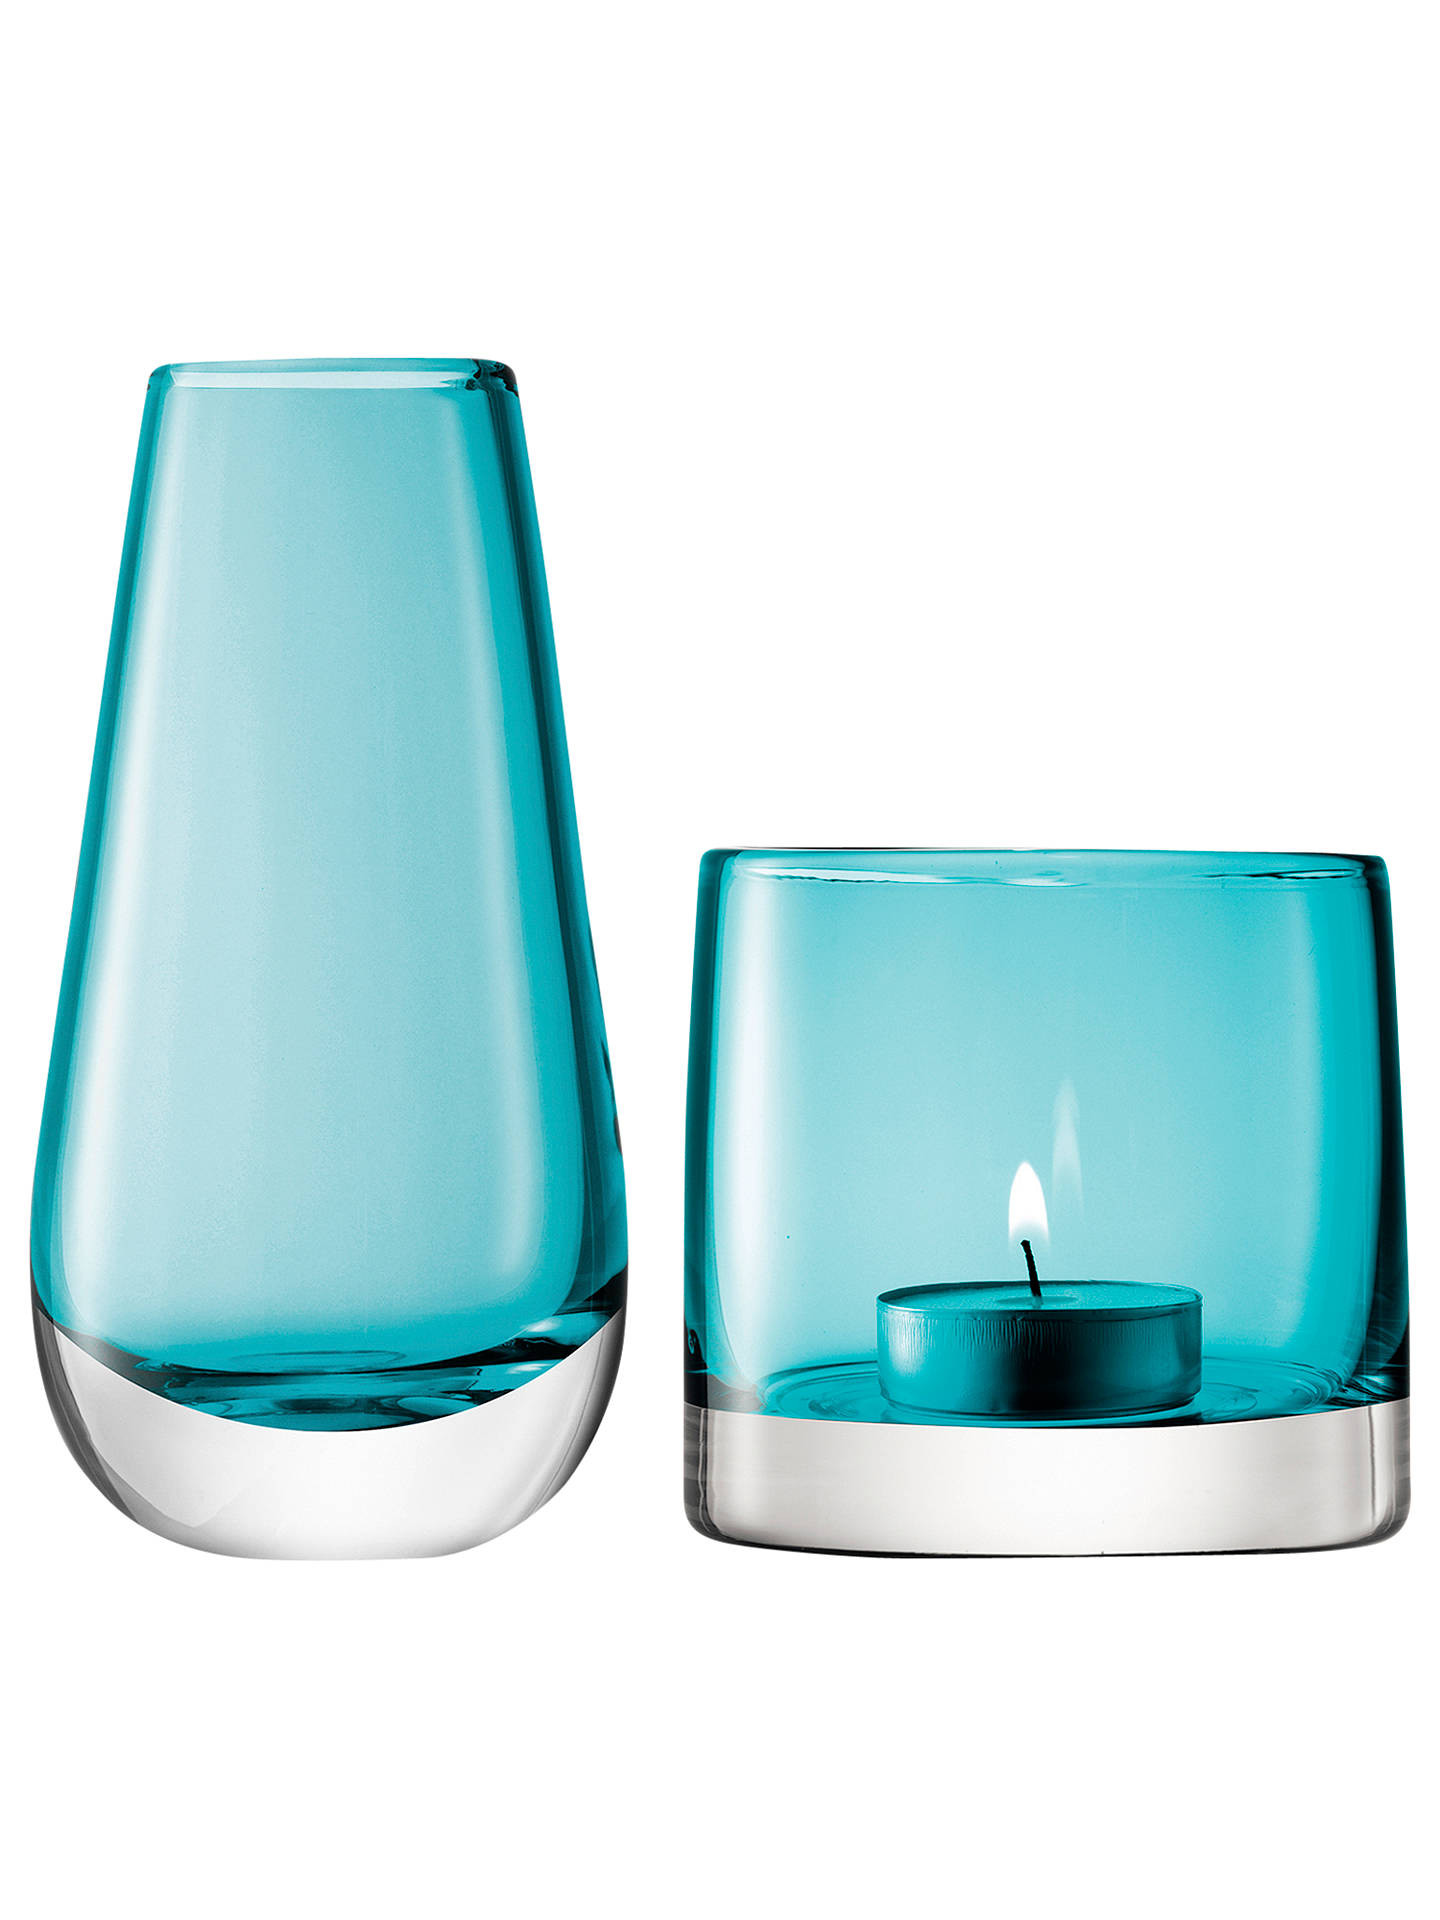 mini vase set of bud vases small glass vases with strong suction cups for t with regard to buylsa international flower bud vase and tealight holder peacock online at johnlewis com